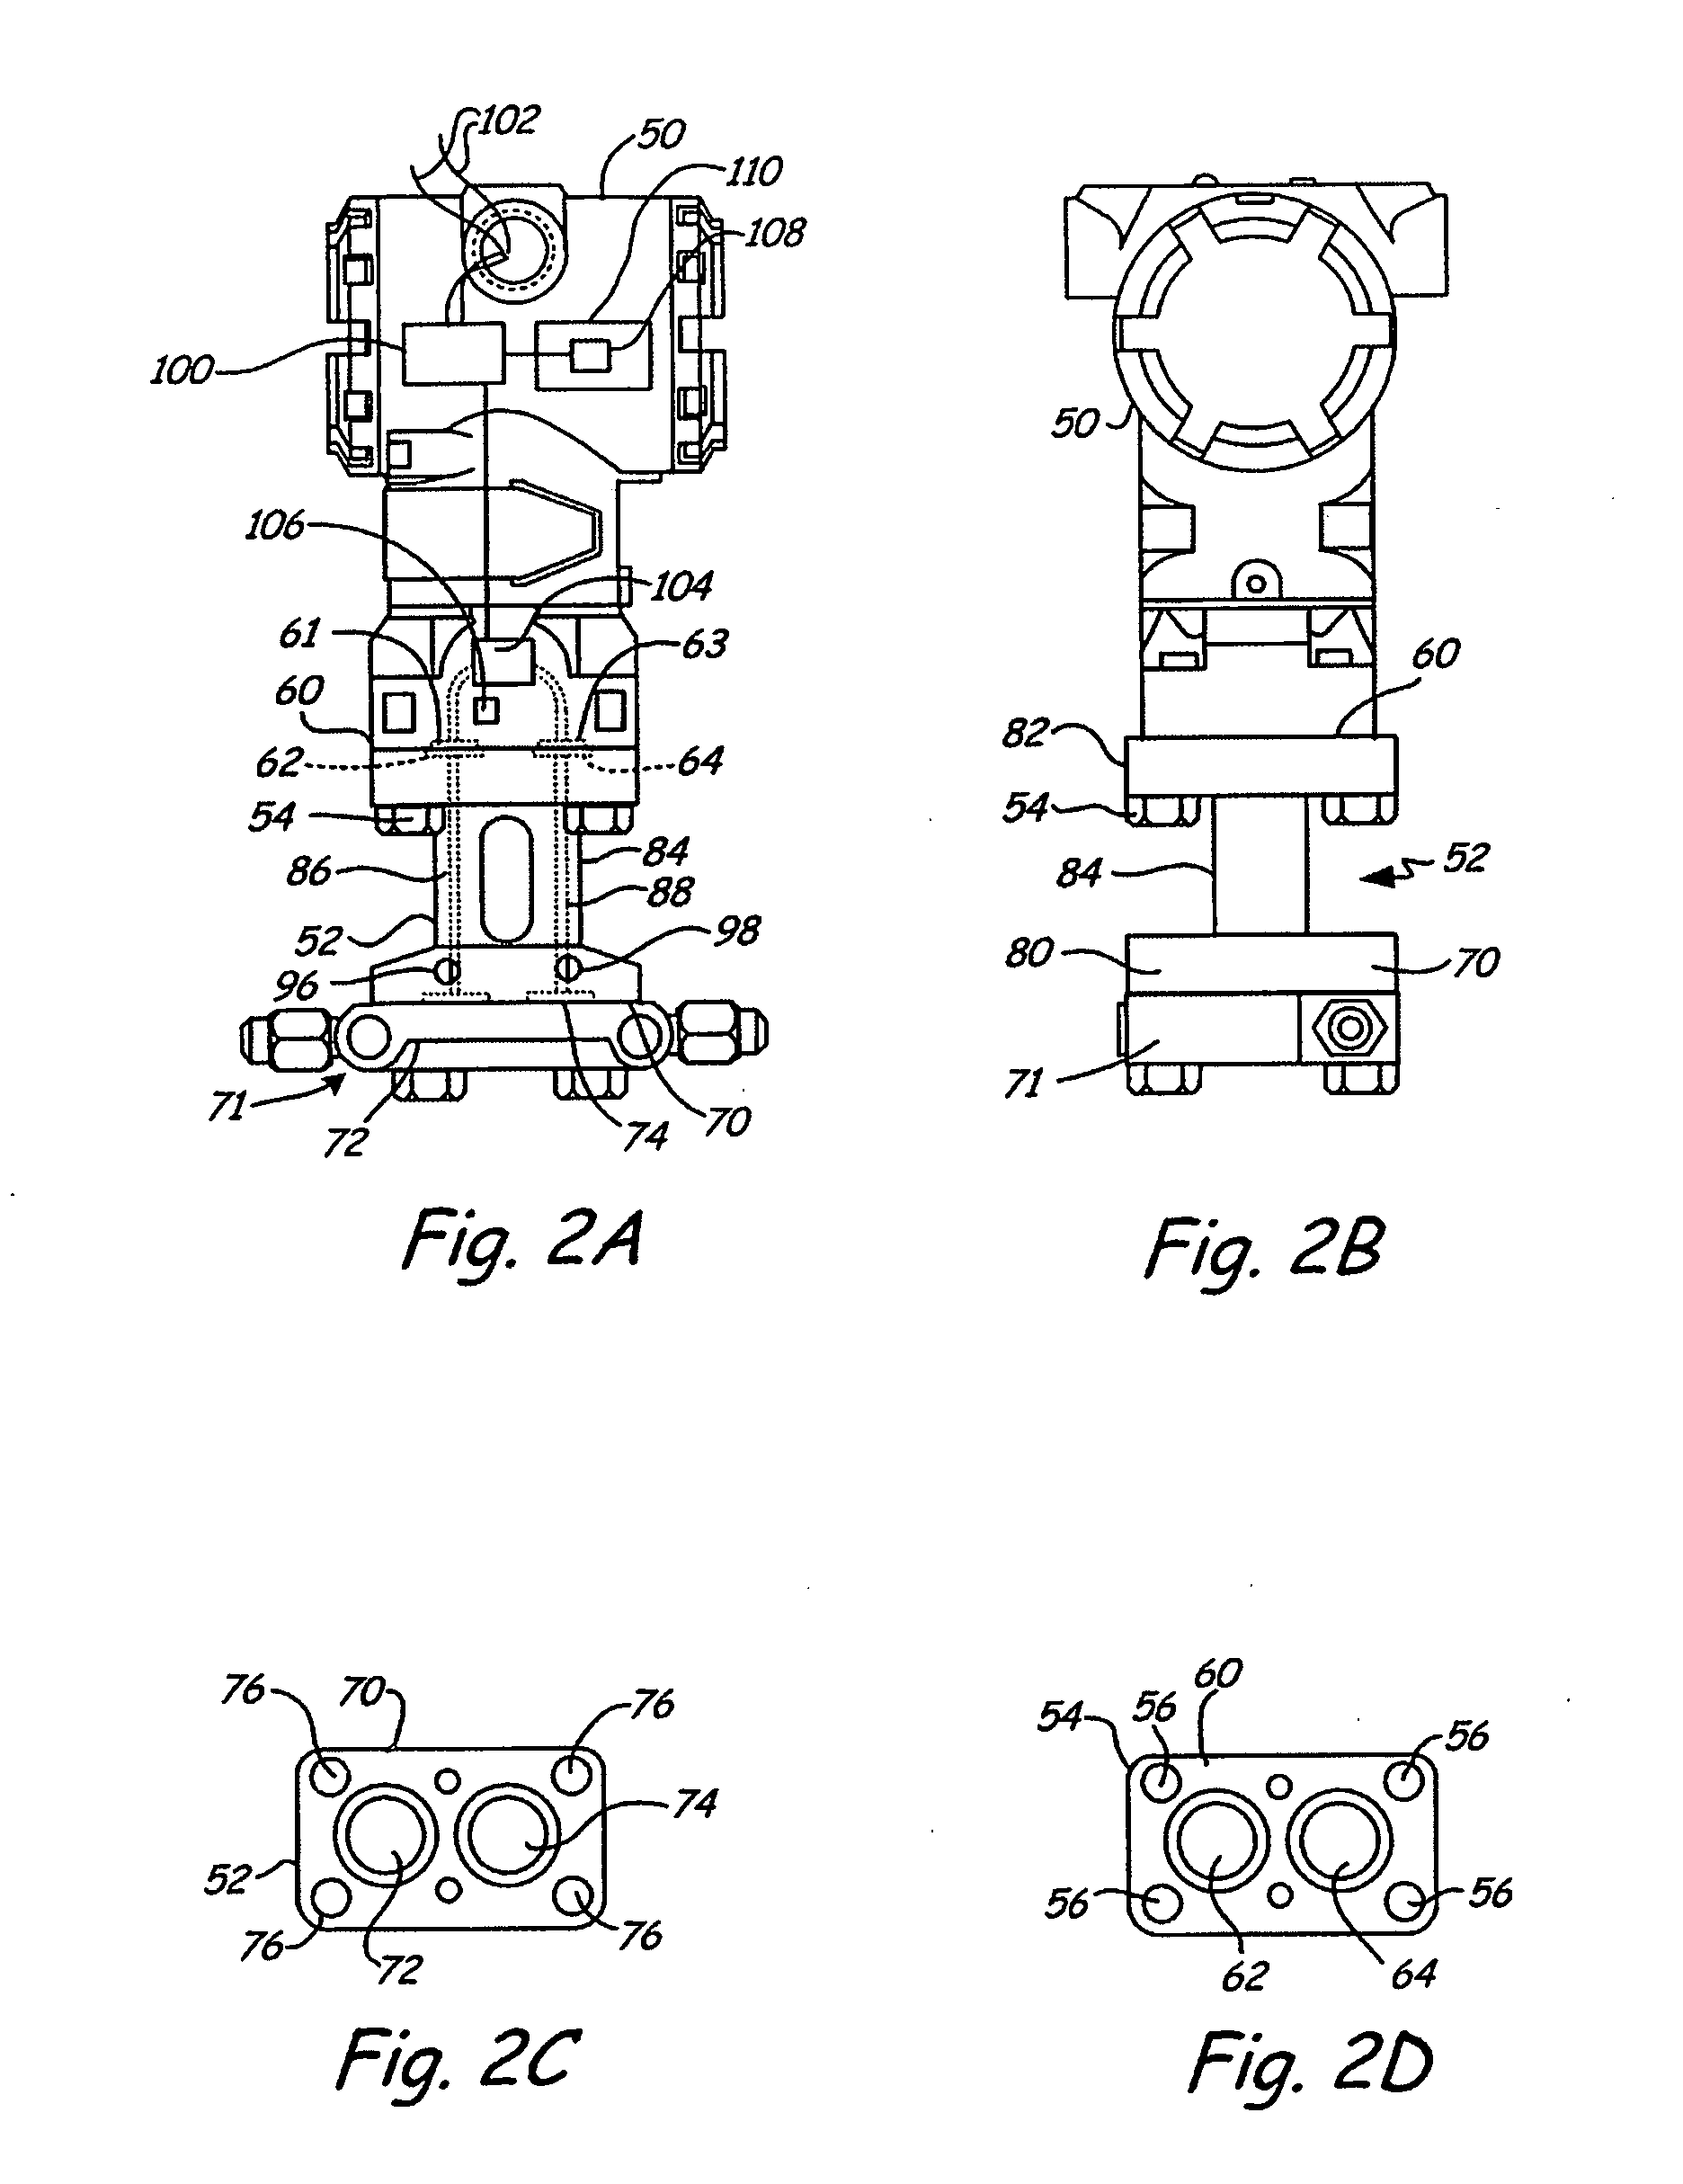 Process transmitter isolation assembly